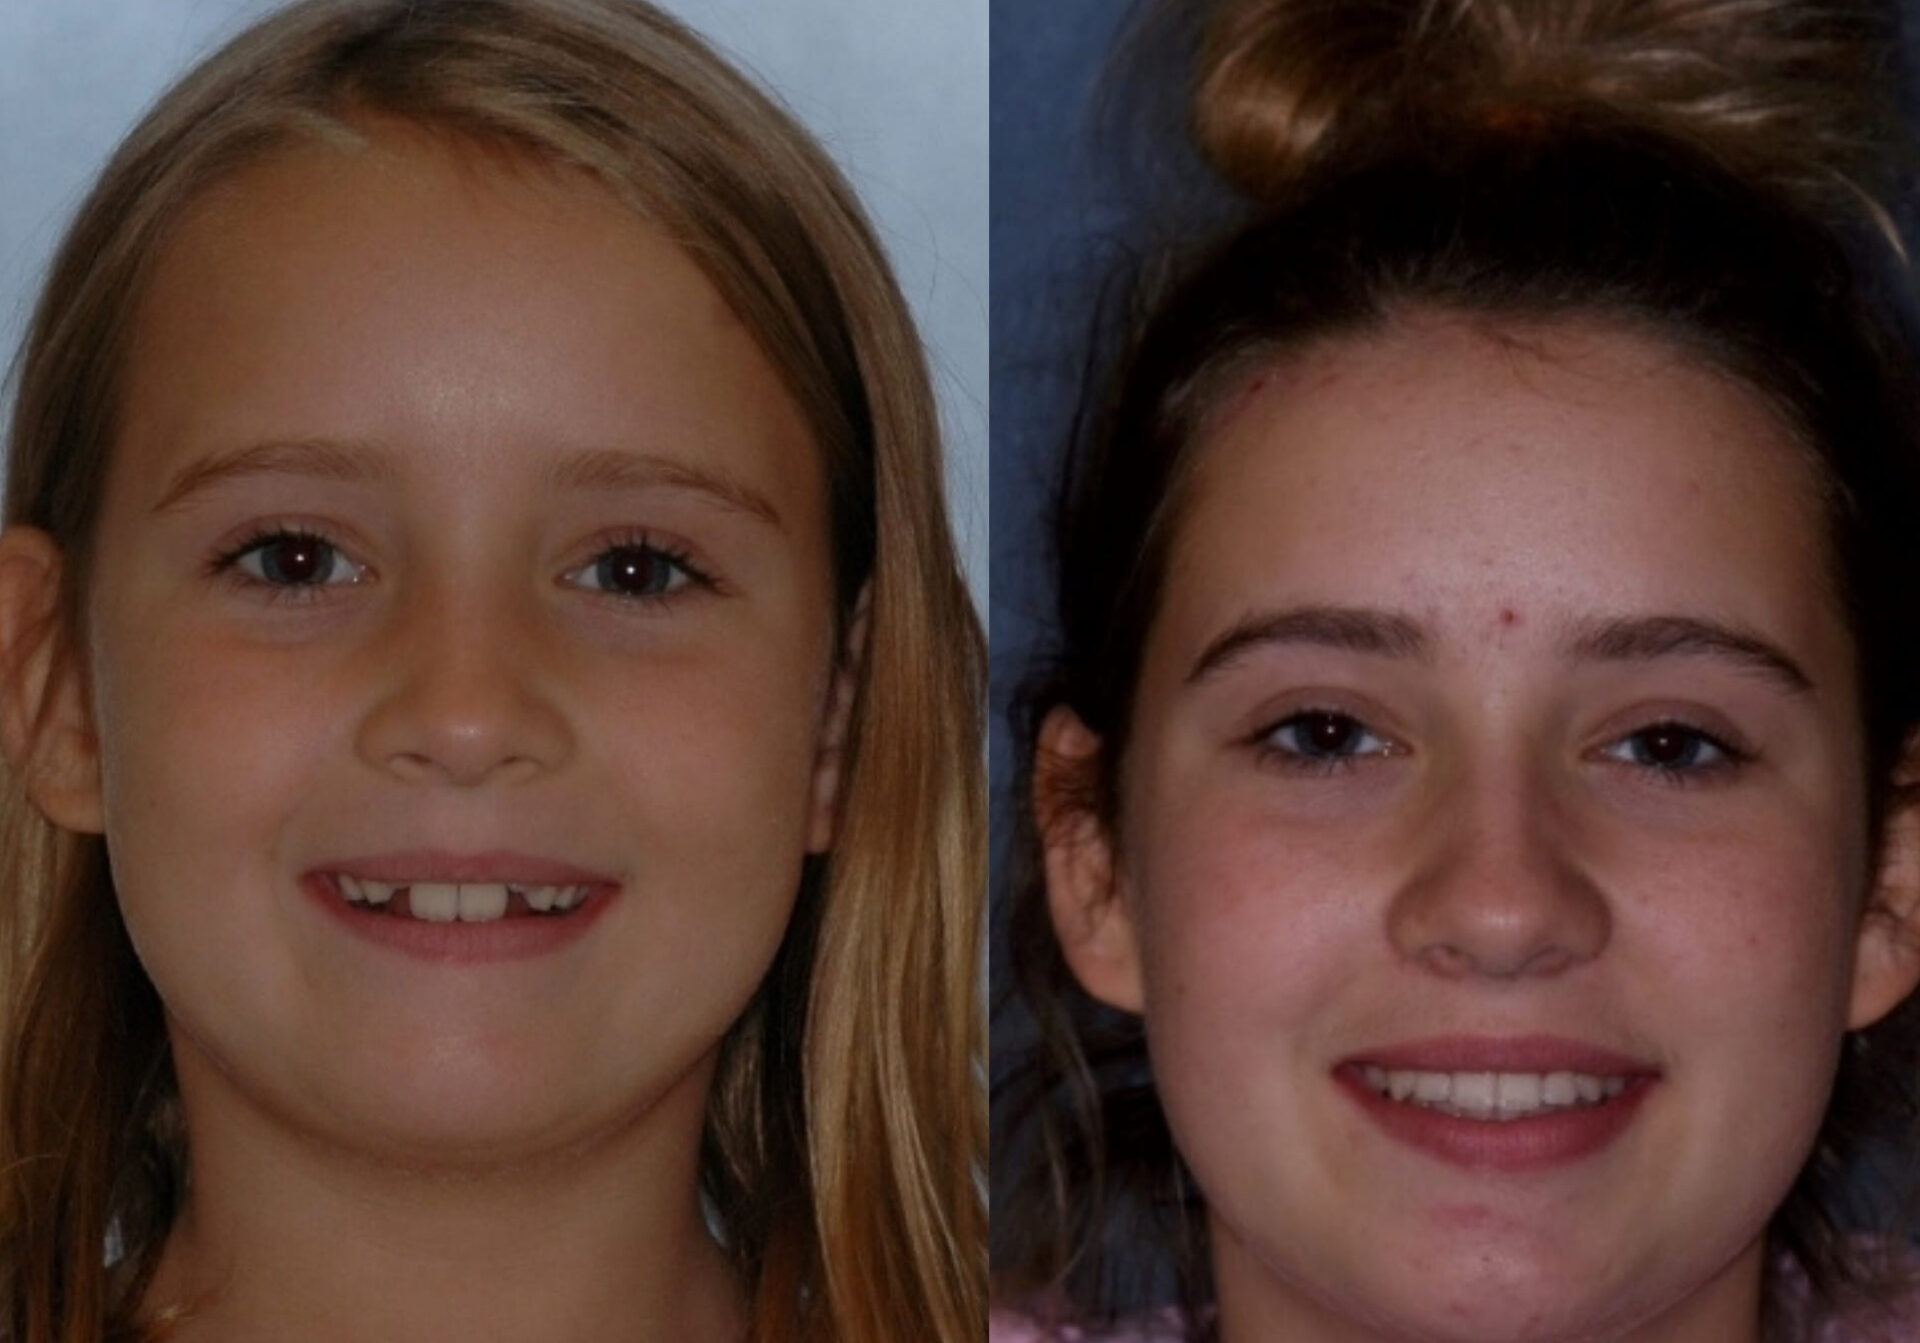 Before and After Orthodontic Pictures